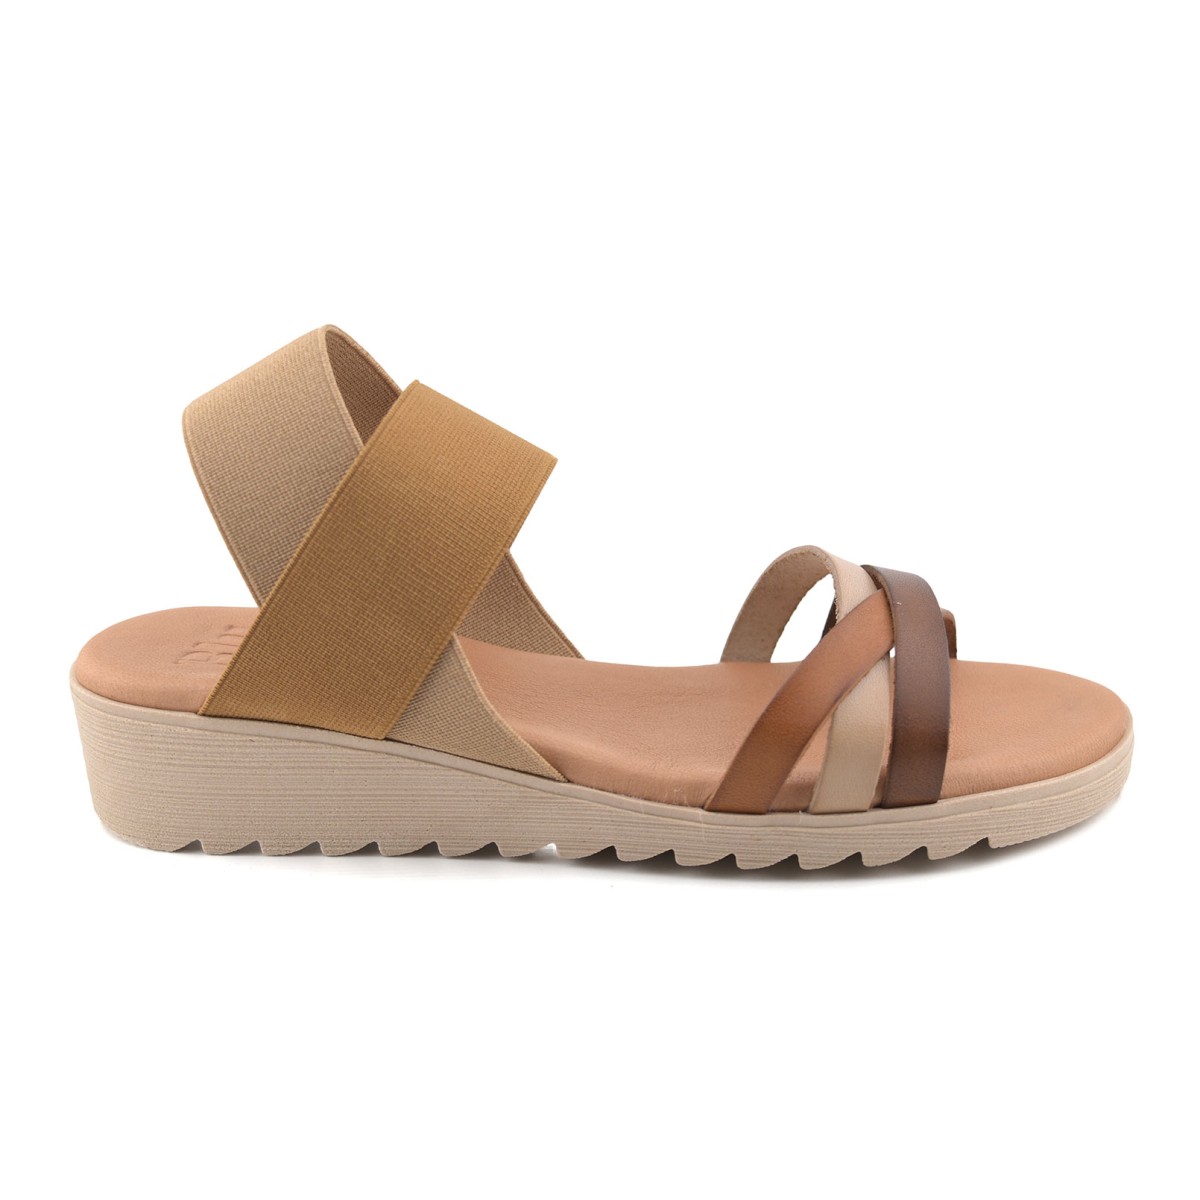 Brown leather wedge sandals by Blusandal